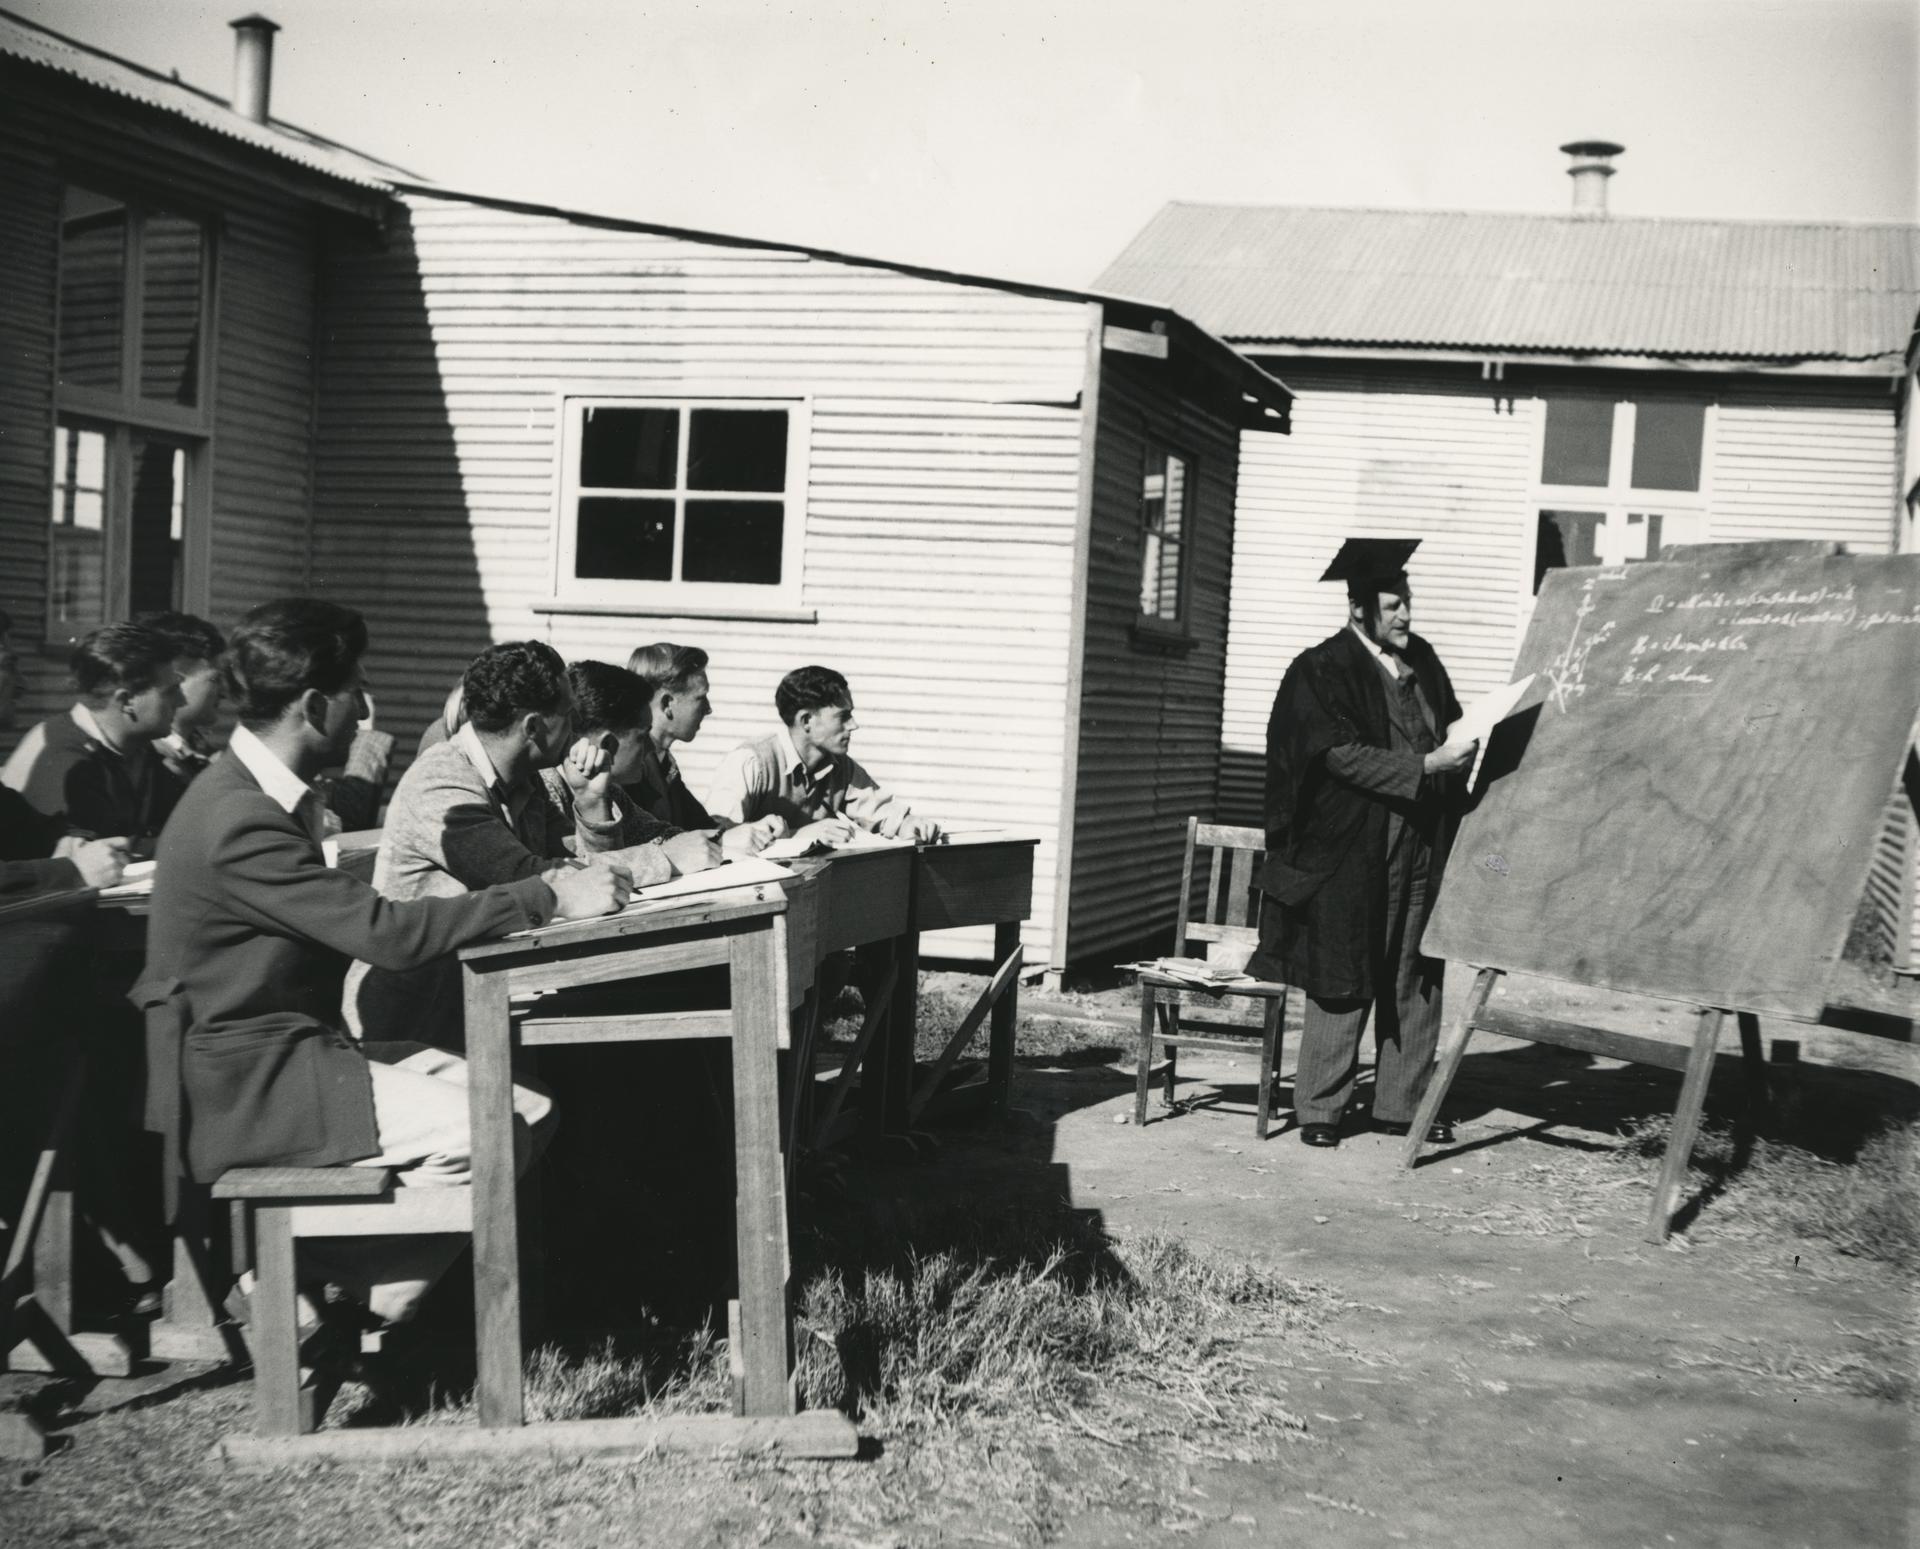 Outdoor lecture, 1948.